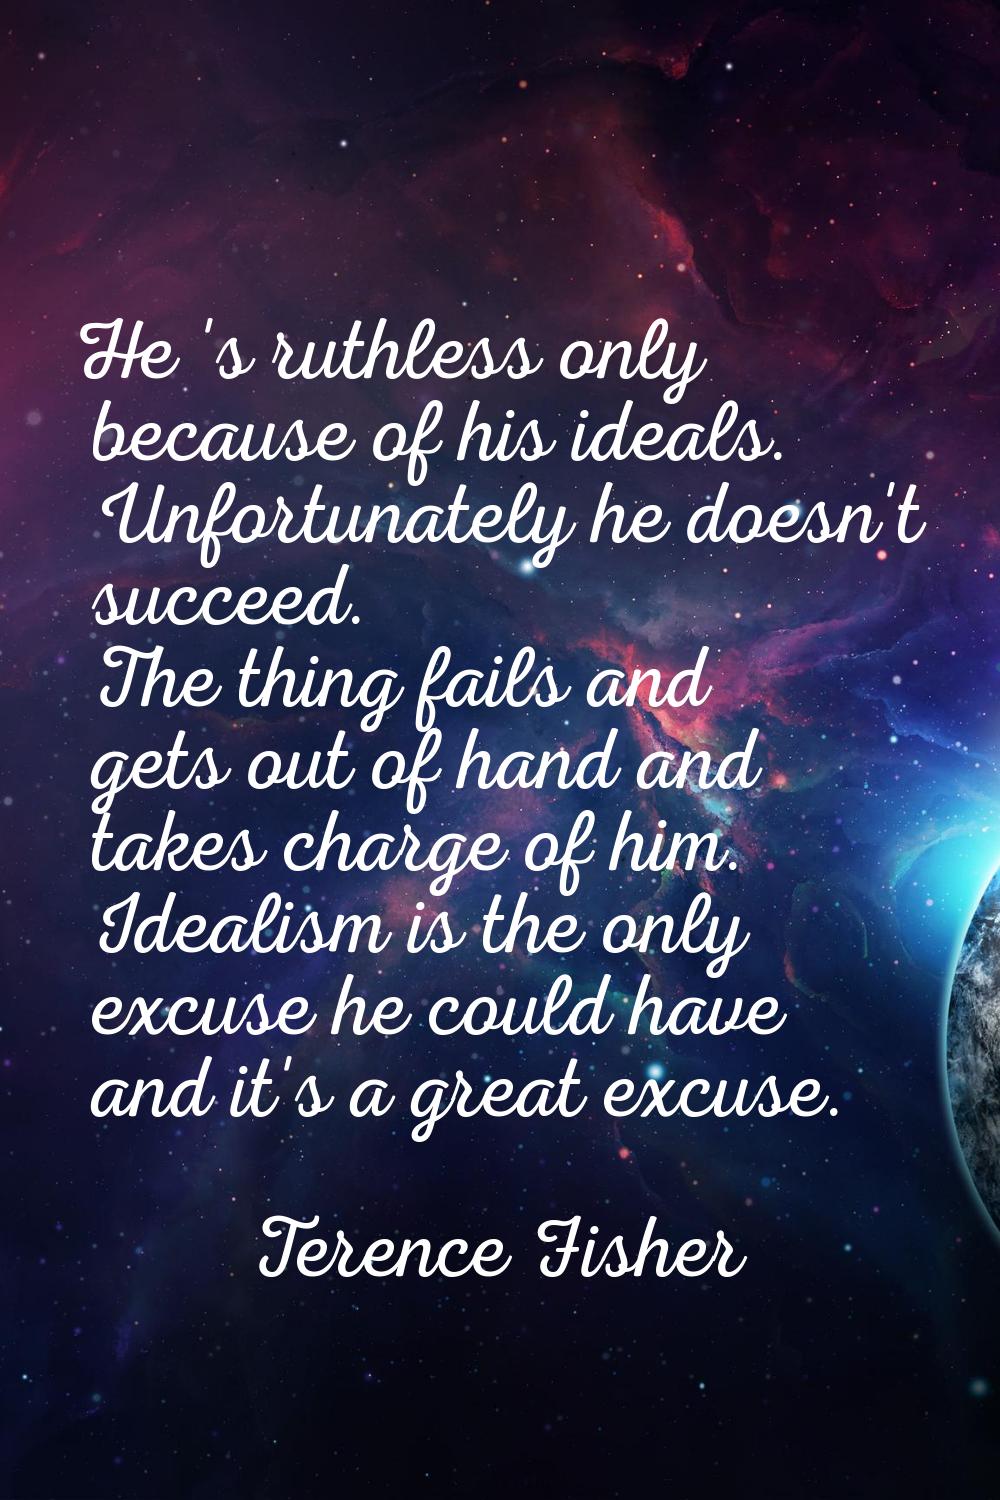 He 's ruthless only because of his ideals. Unfortunately he doesn't succeed. The thing fails and ge